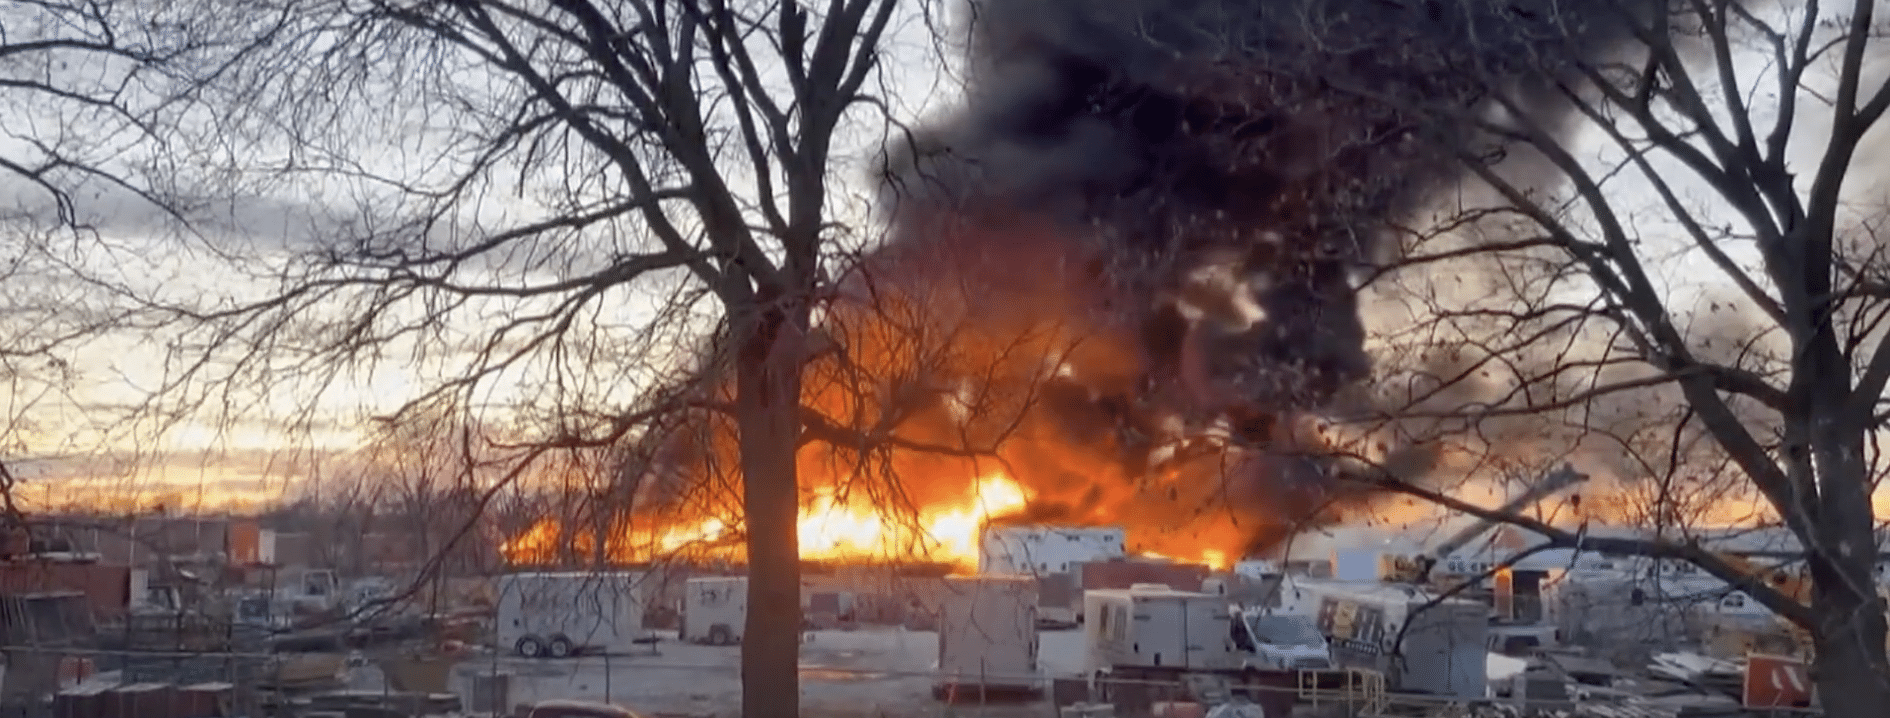 (WATCH) Multiple cattle barns burn to the ground in Rock Island, Illinois